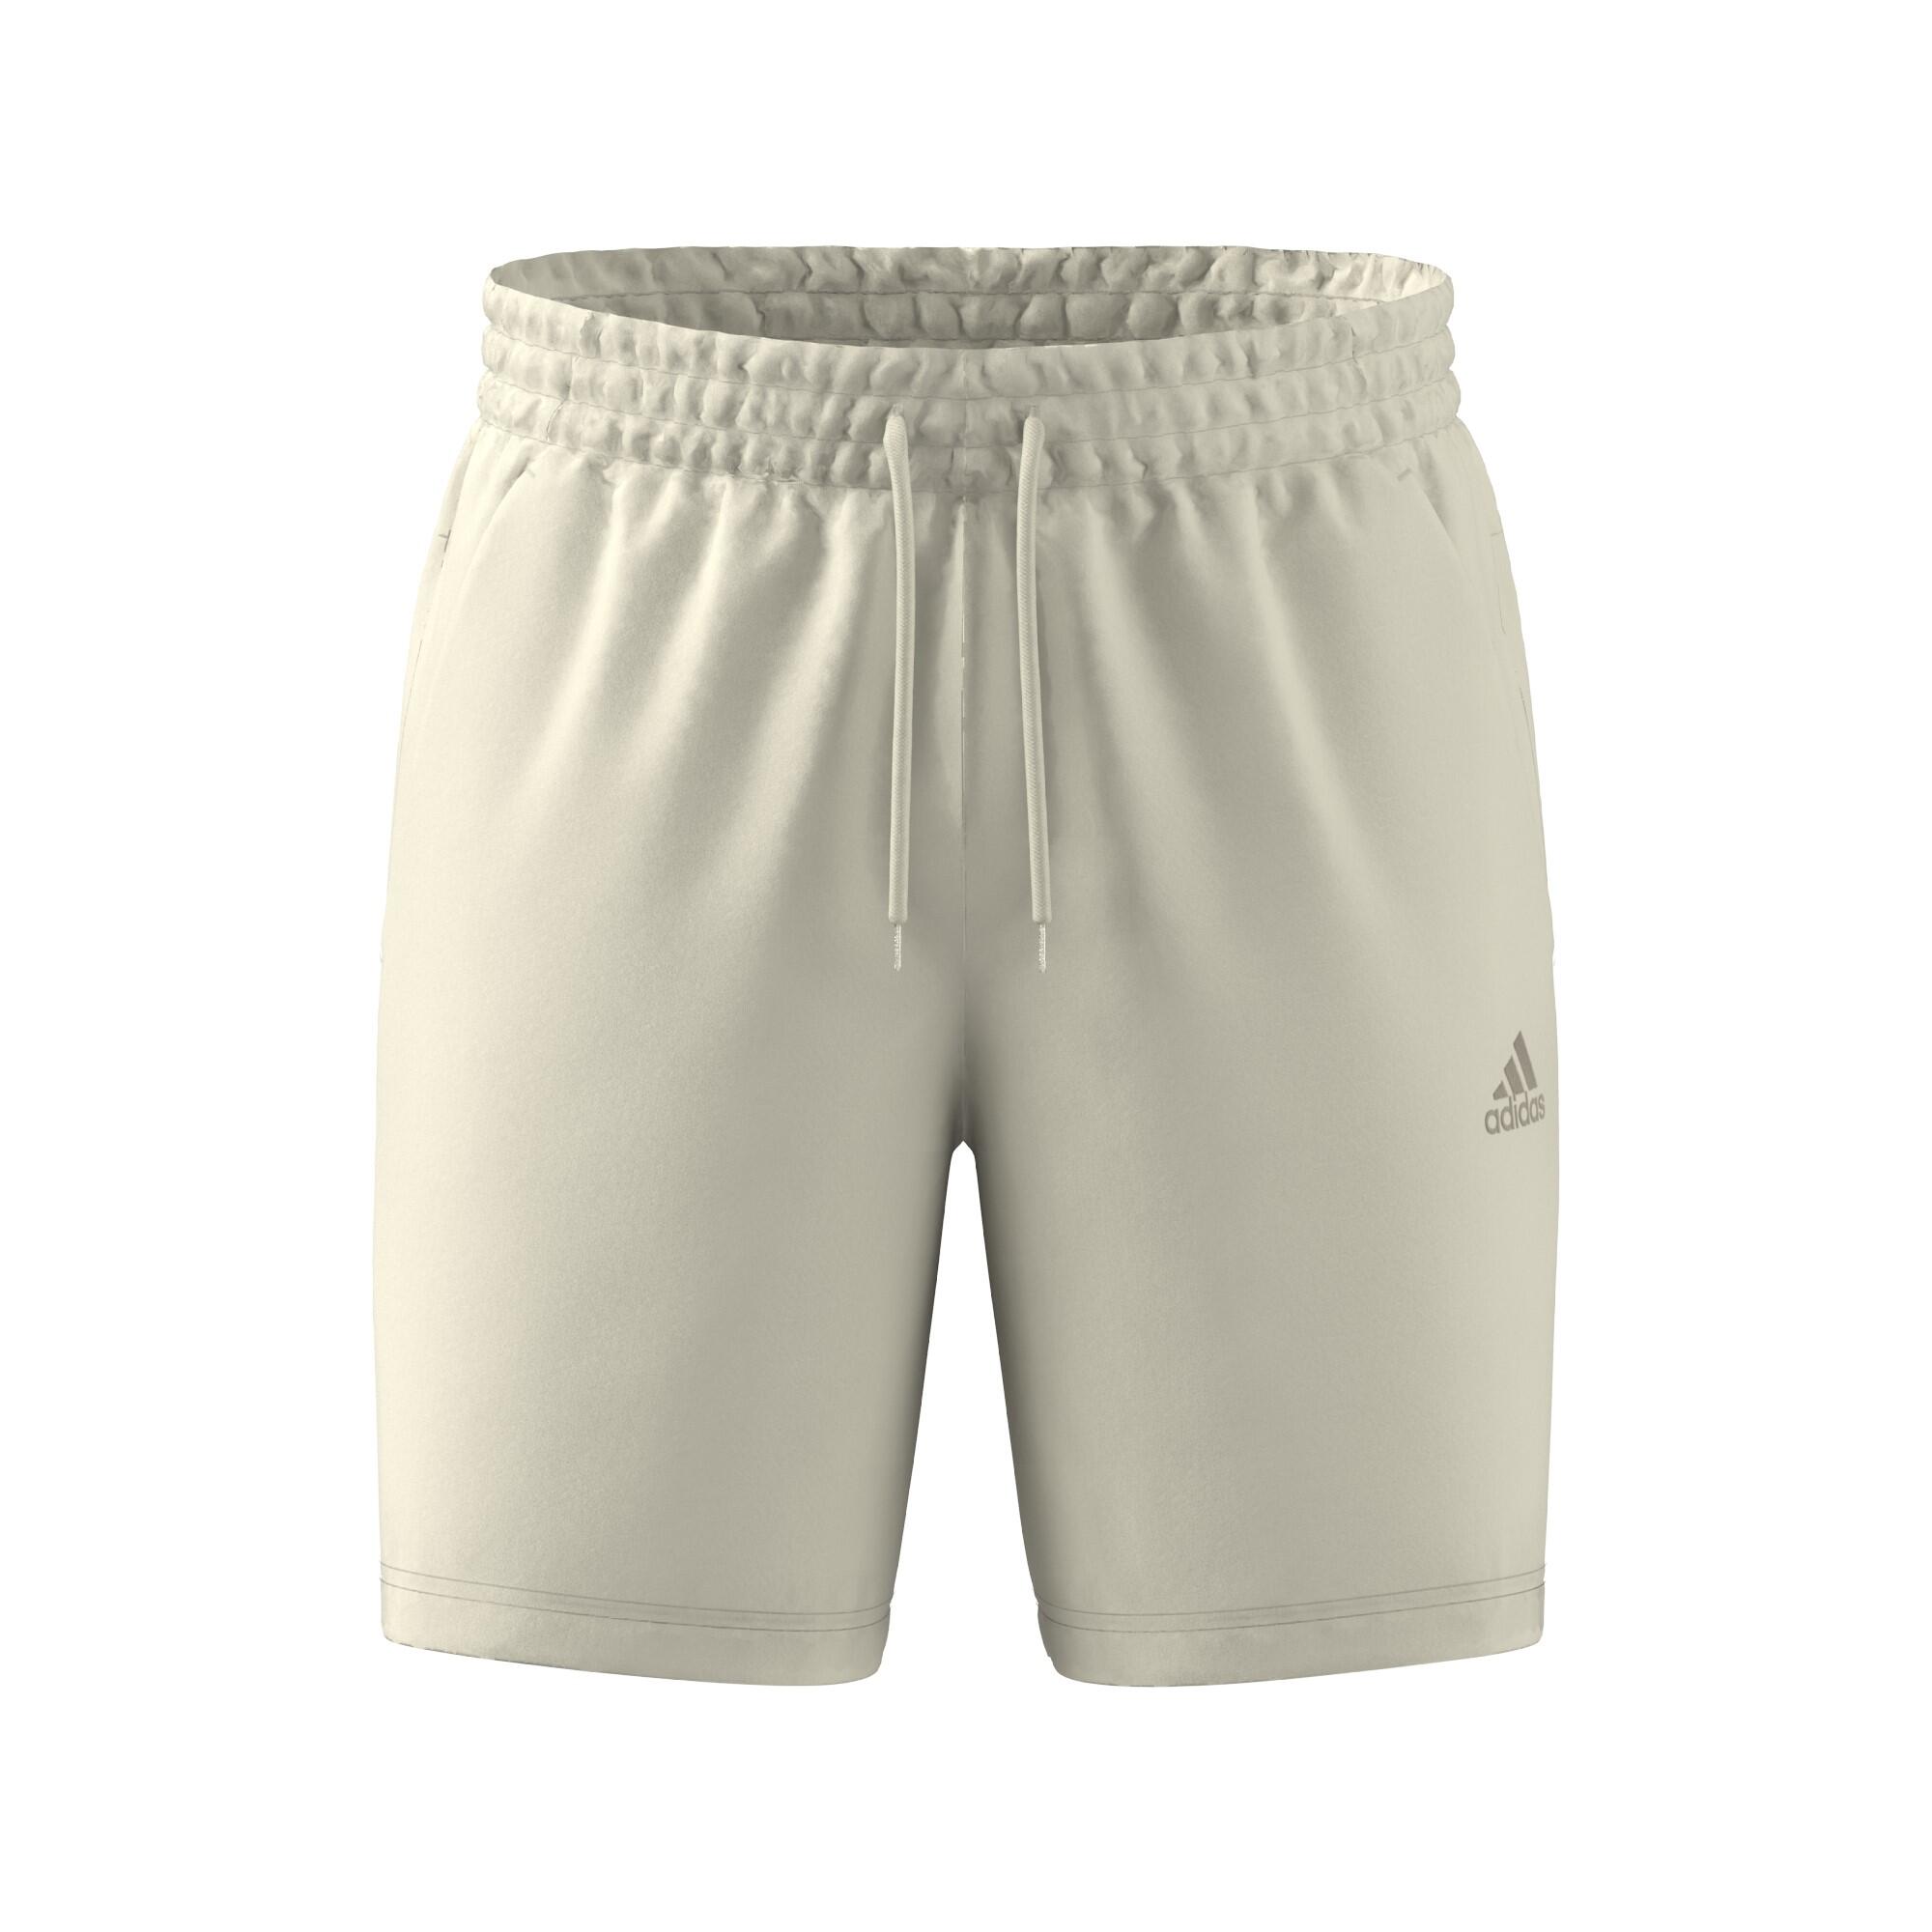 Men's Low-Impact Fitness Shorts - Off-White 1/1